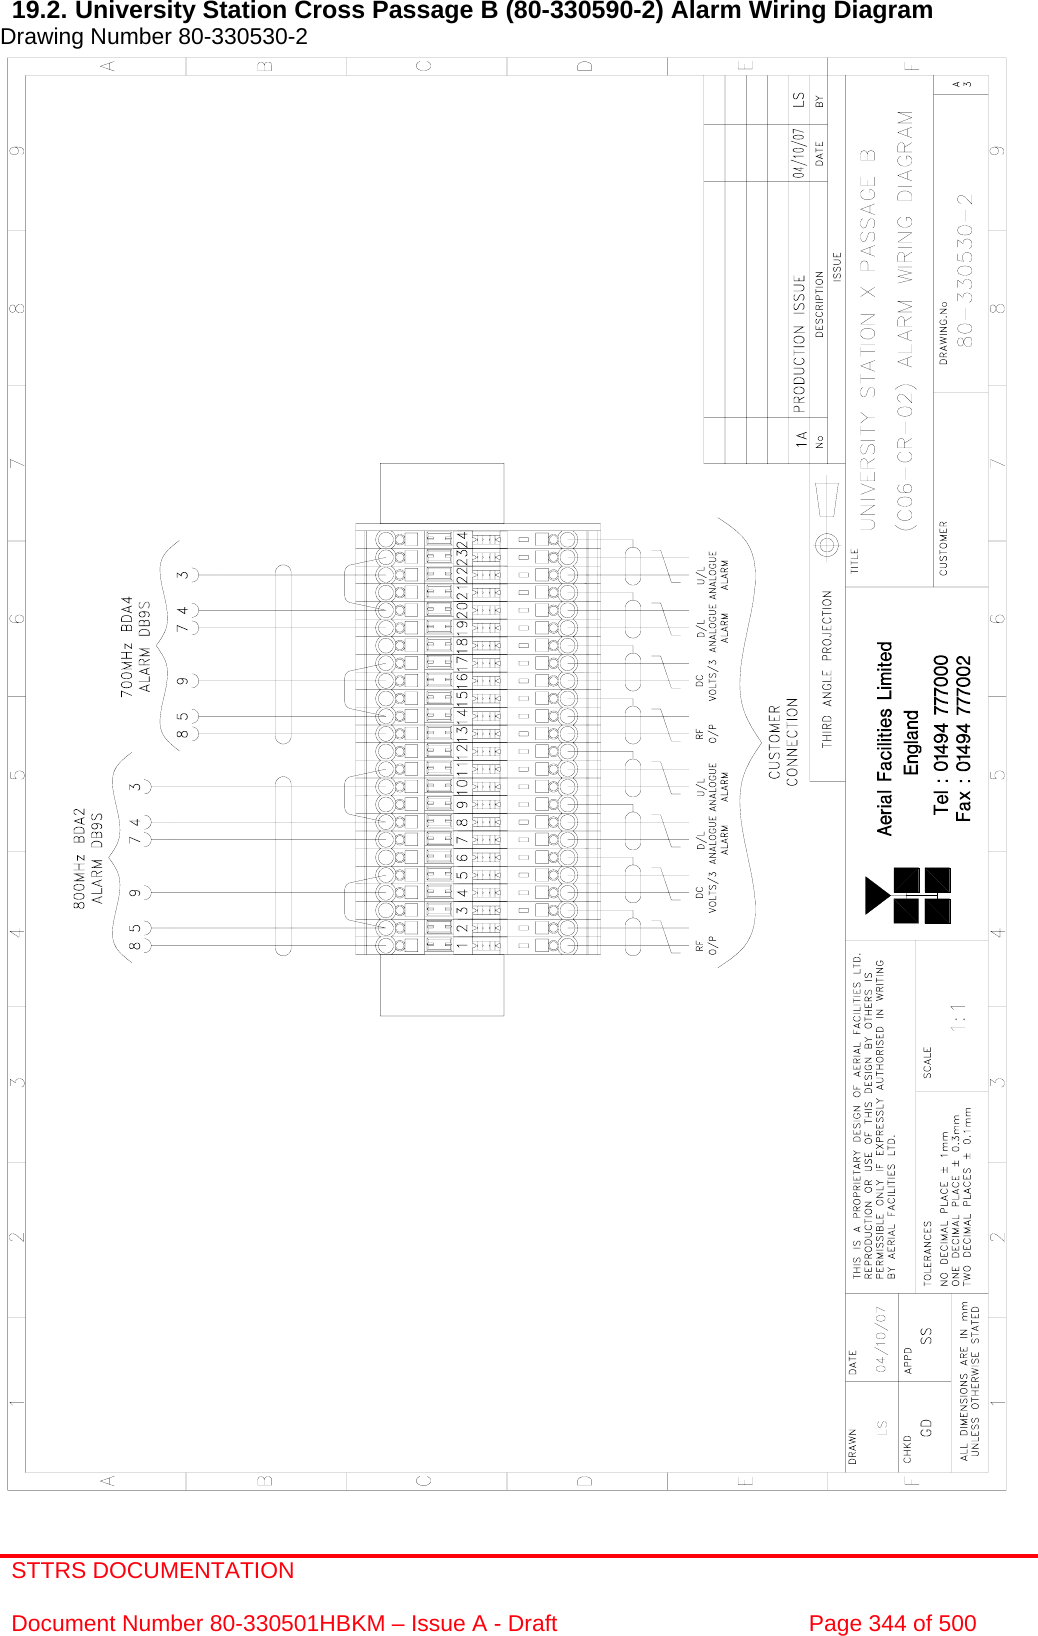 STTRS DOCUMENTATION  Document Number 80-330501HBKM – Issue A - Draft  Page 344 of 500   19.2. University Station Cross Passage B (80-330590-2) Alarm Wiring Diagram  Drawing Number 80-330530-2                                                         